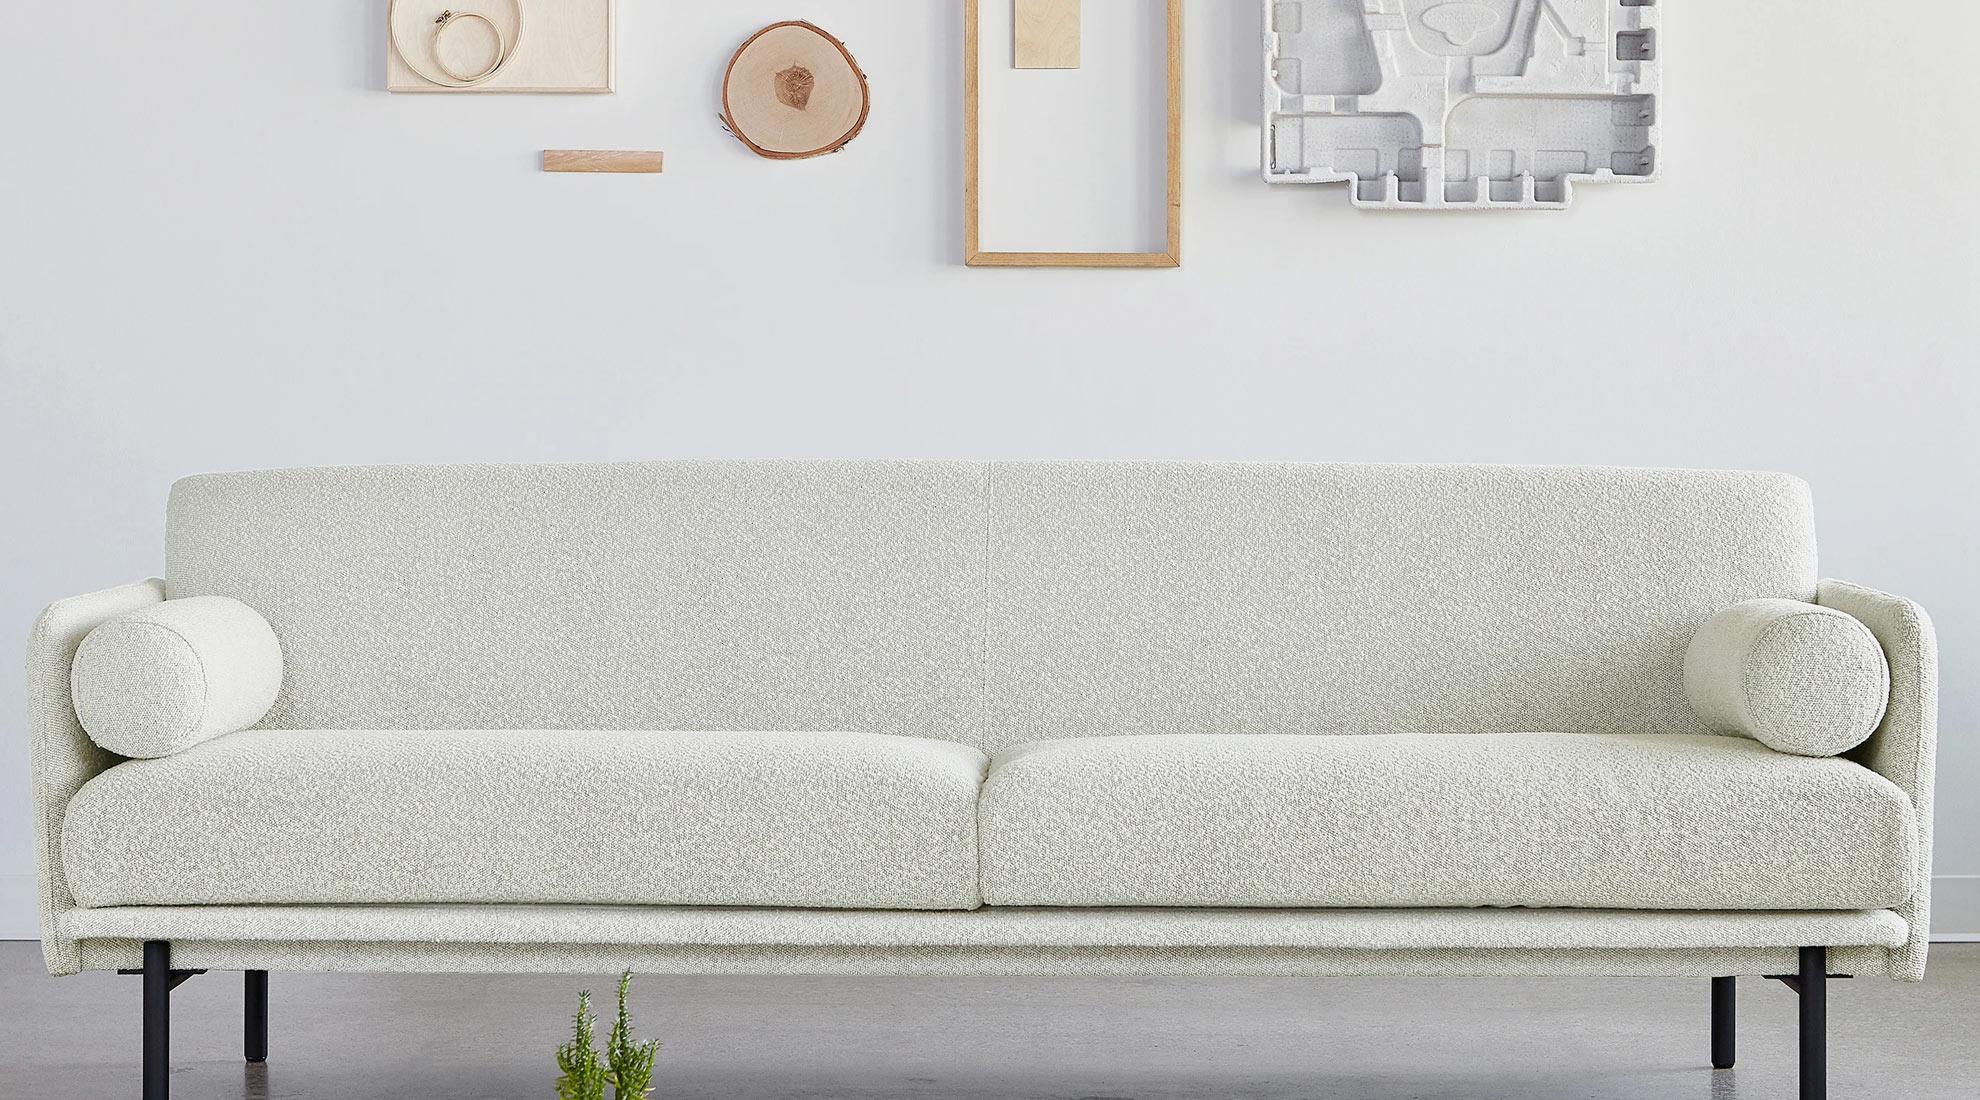 Upholstery Buyer’s Guide